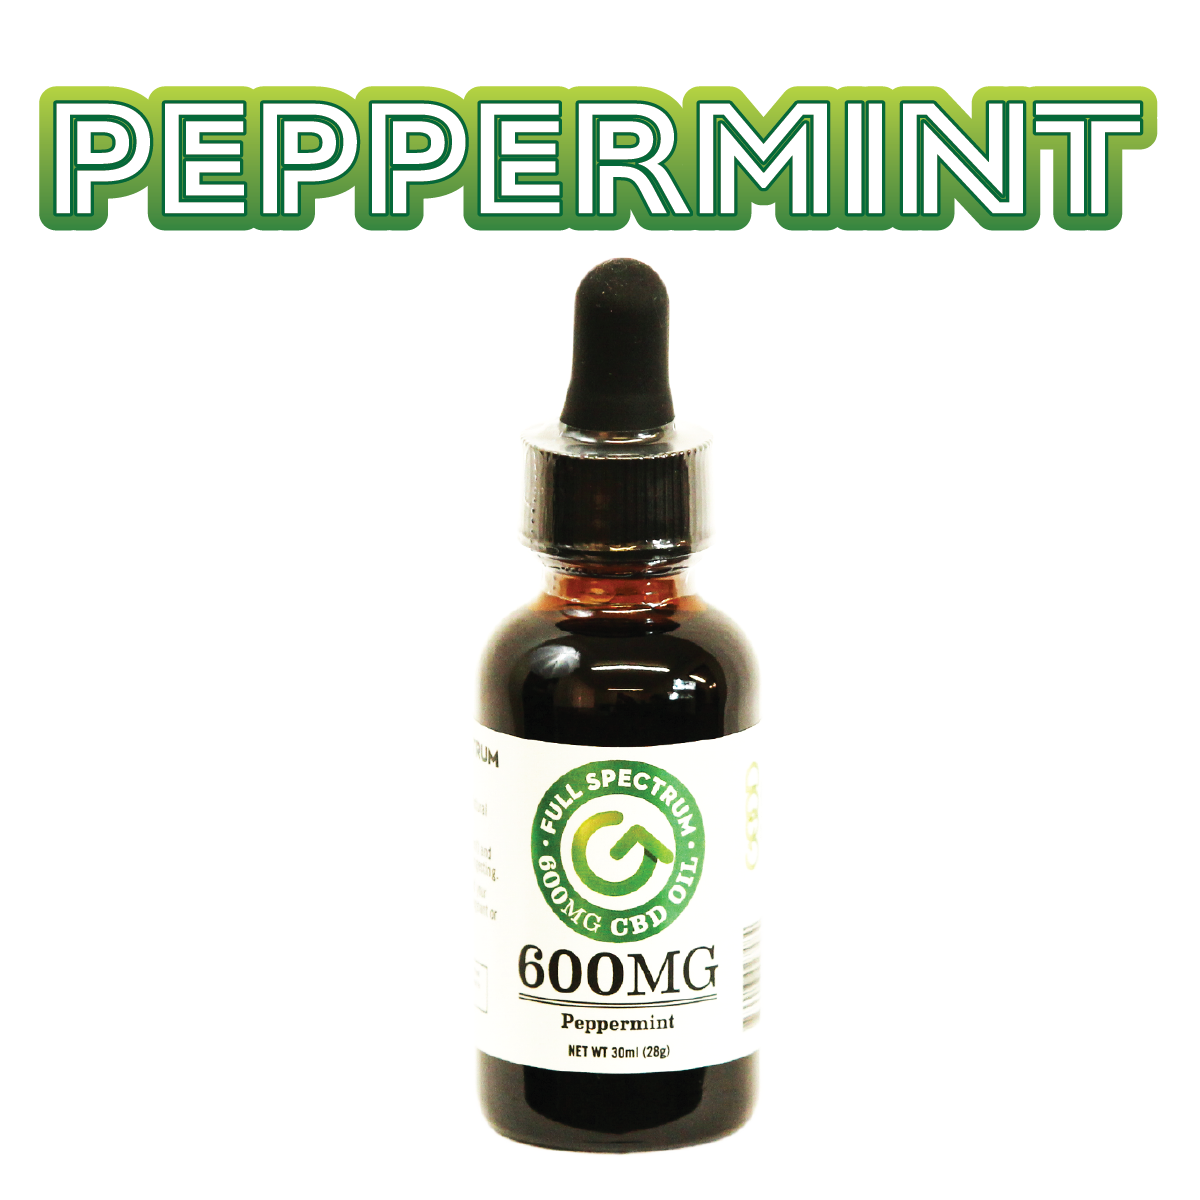 Full Spectrum CBD Tincture, Peppermint is available at GoodCBD.com. We offers CBD tincture for sale includes CBD for anxiety, CBD for pain, CBN oil for sale. Our website carries brands such as: 3CHI, Good CBD, Urb, Injoy Extracts, AiroPro, Delta Effex, and more.